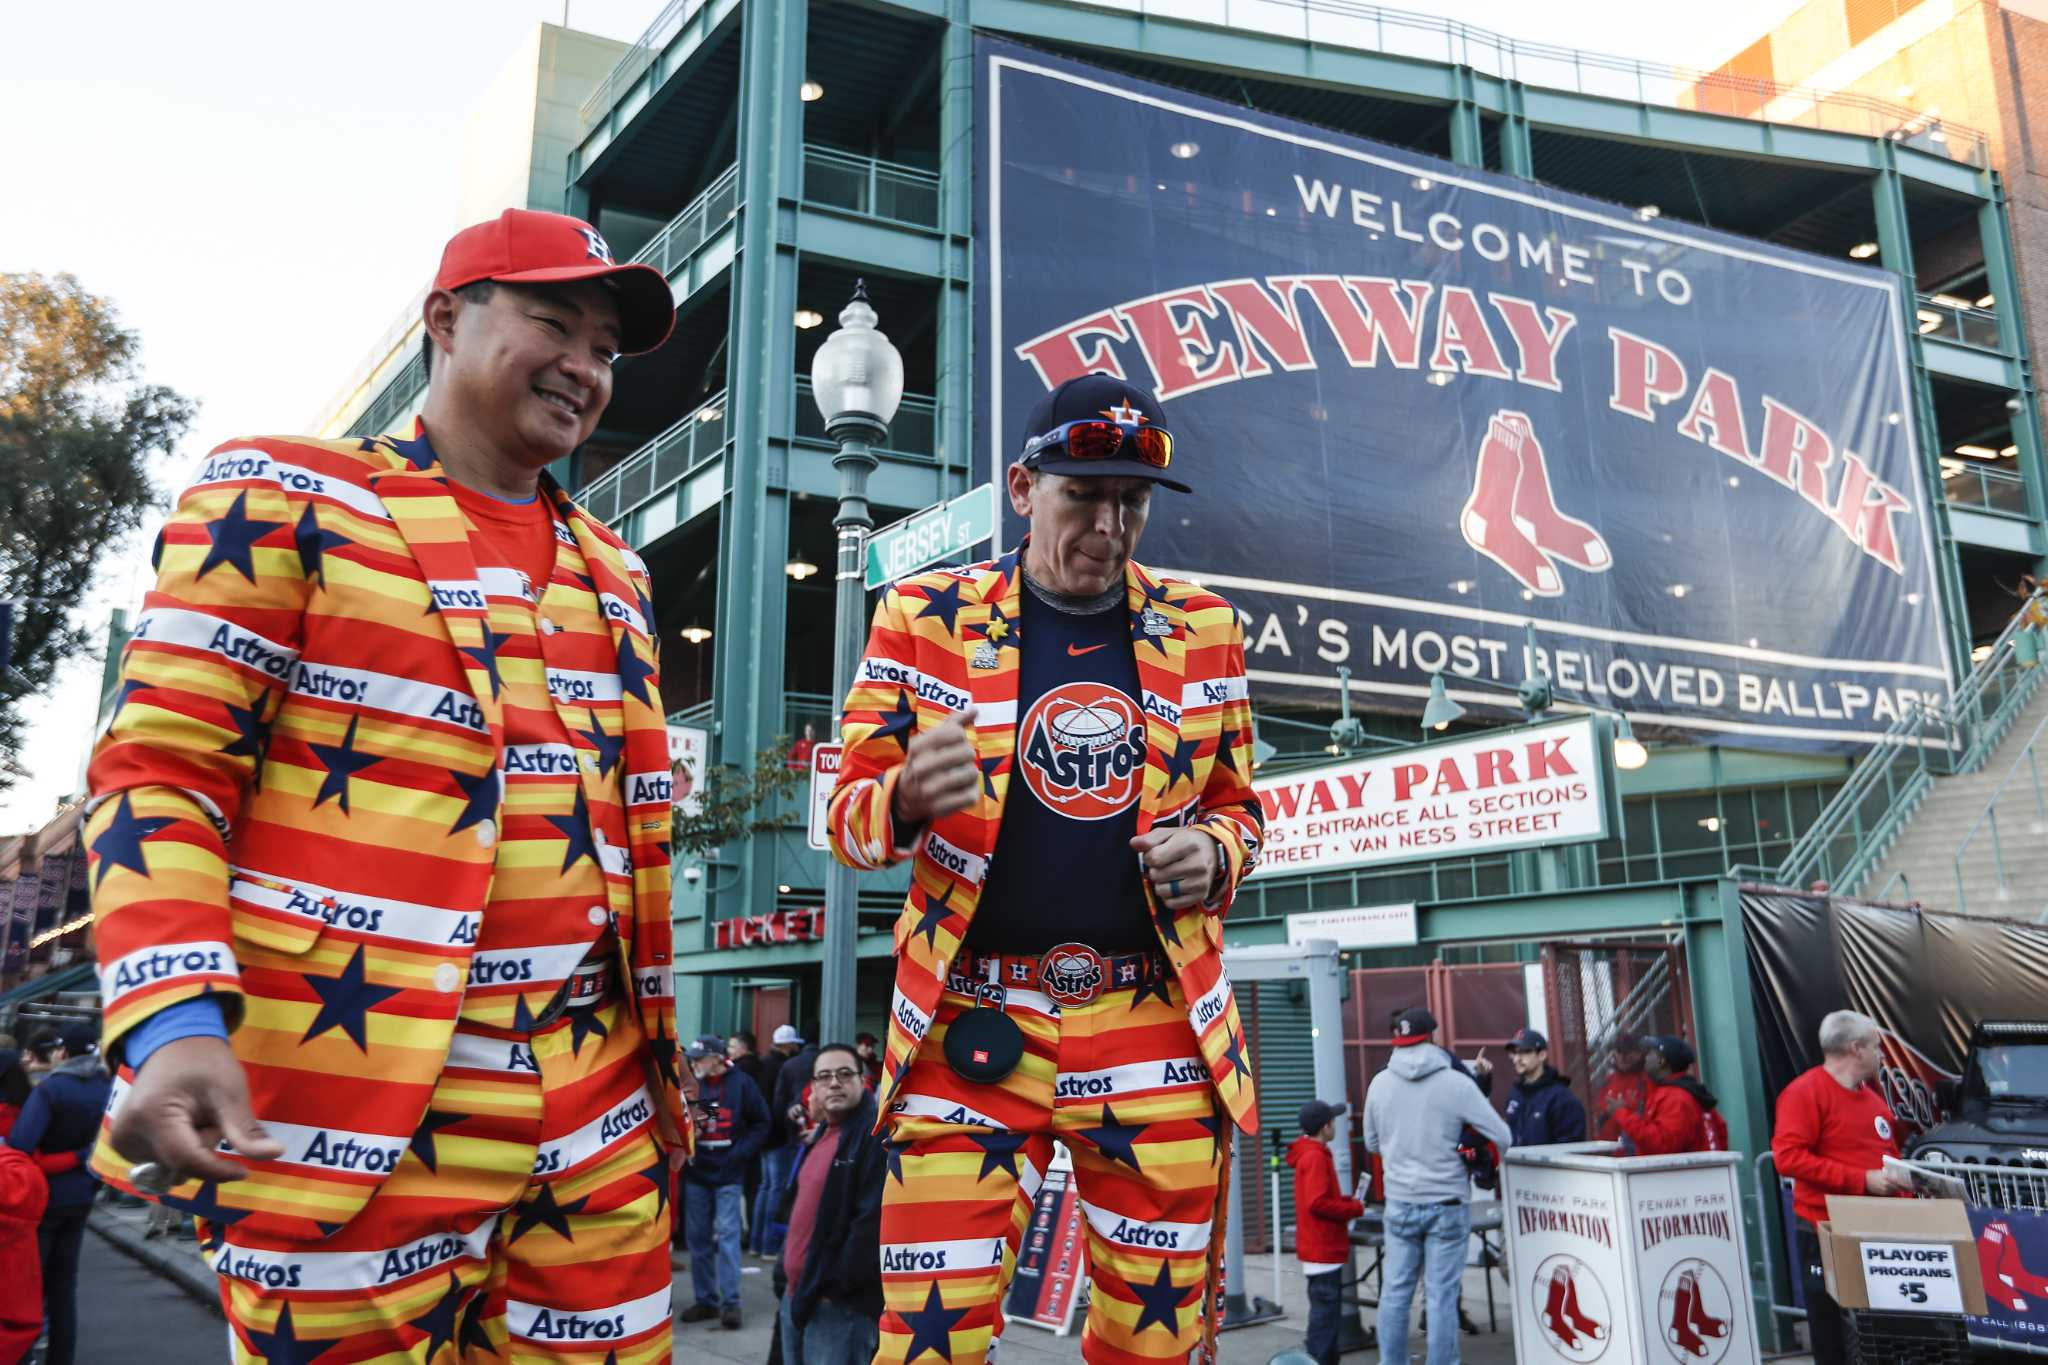 Astros fans gear up for ALCS opener vs. Red Sox at Fenway Park